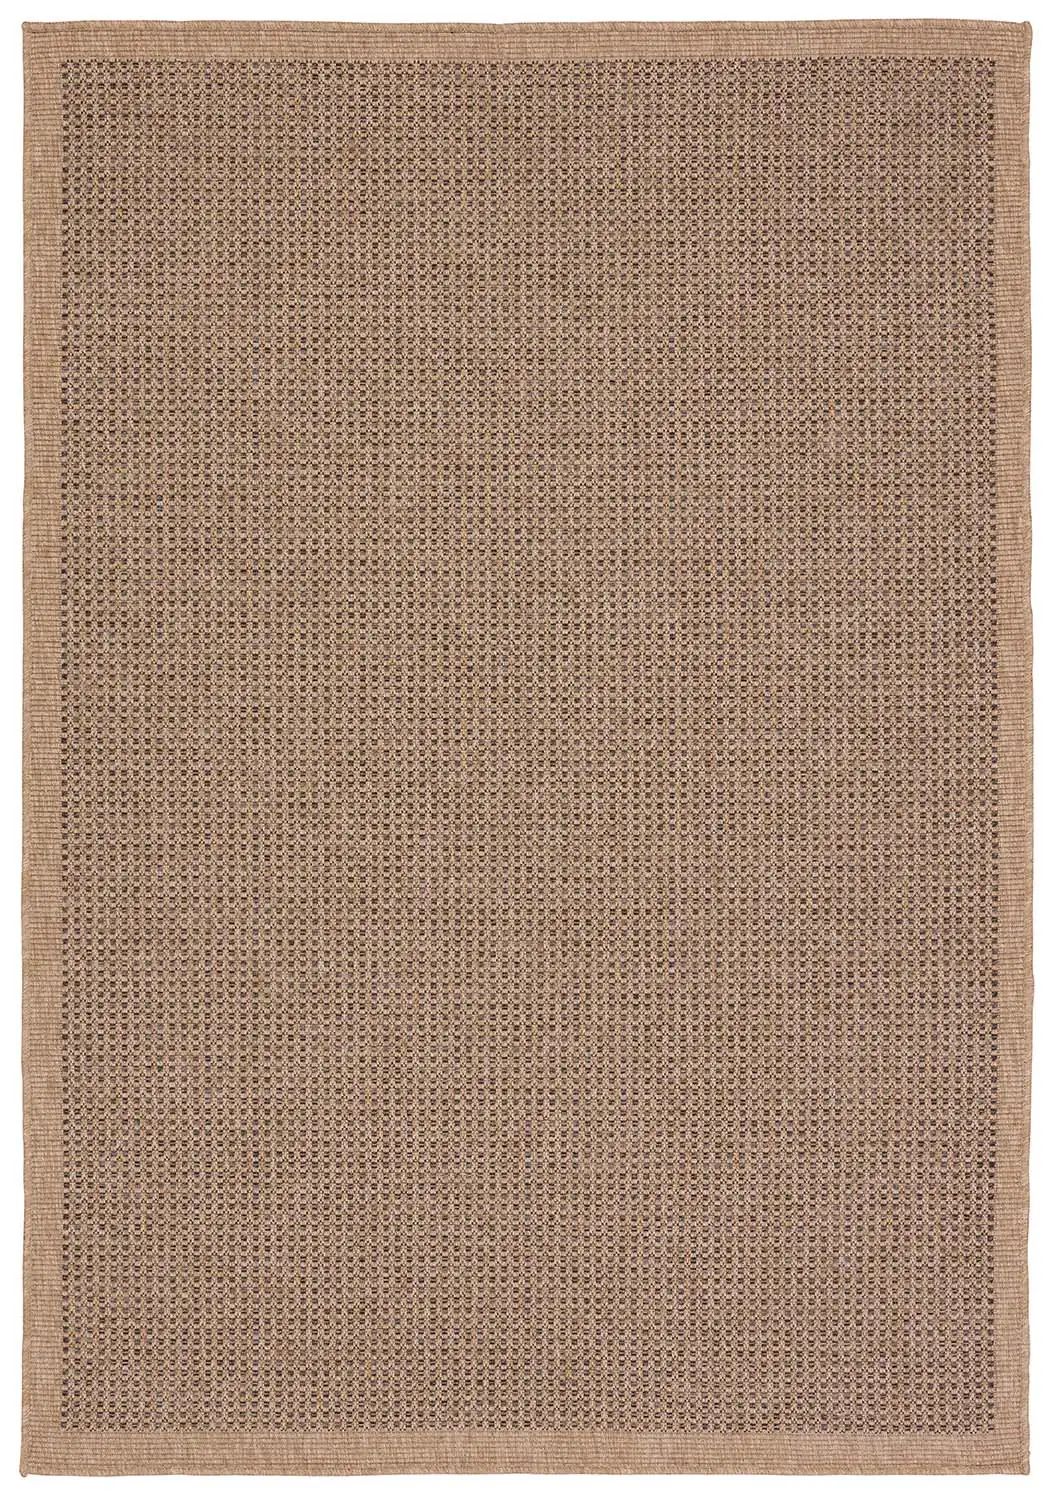 Vibe by Jaipur Living Kidal Indoor/Outdoor Solid Brown/ Black Area Rug  Product Image